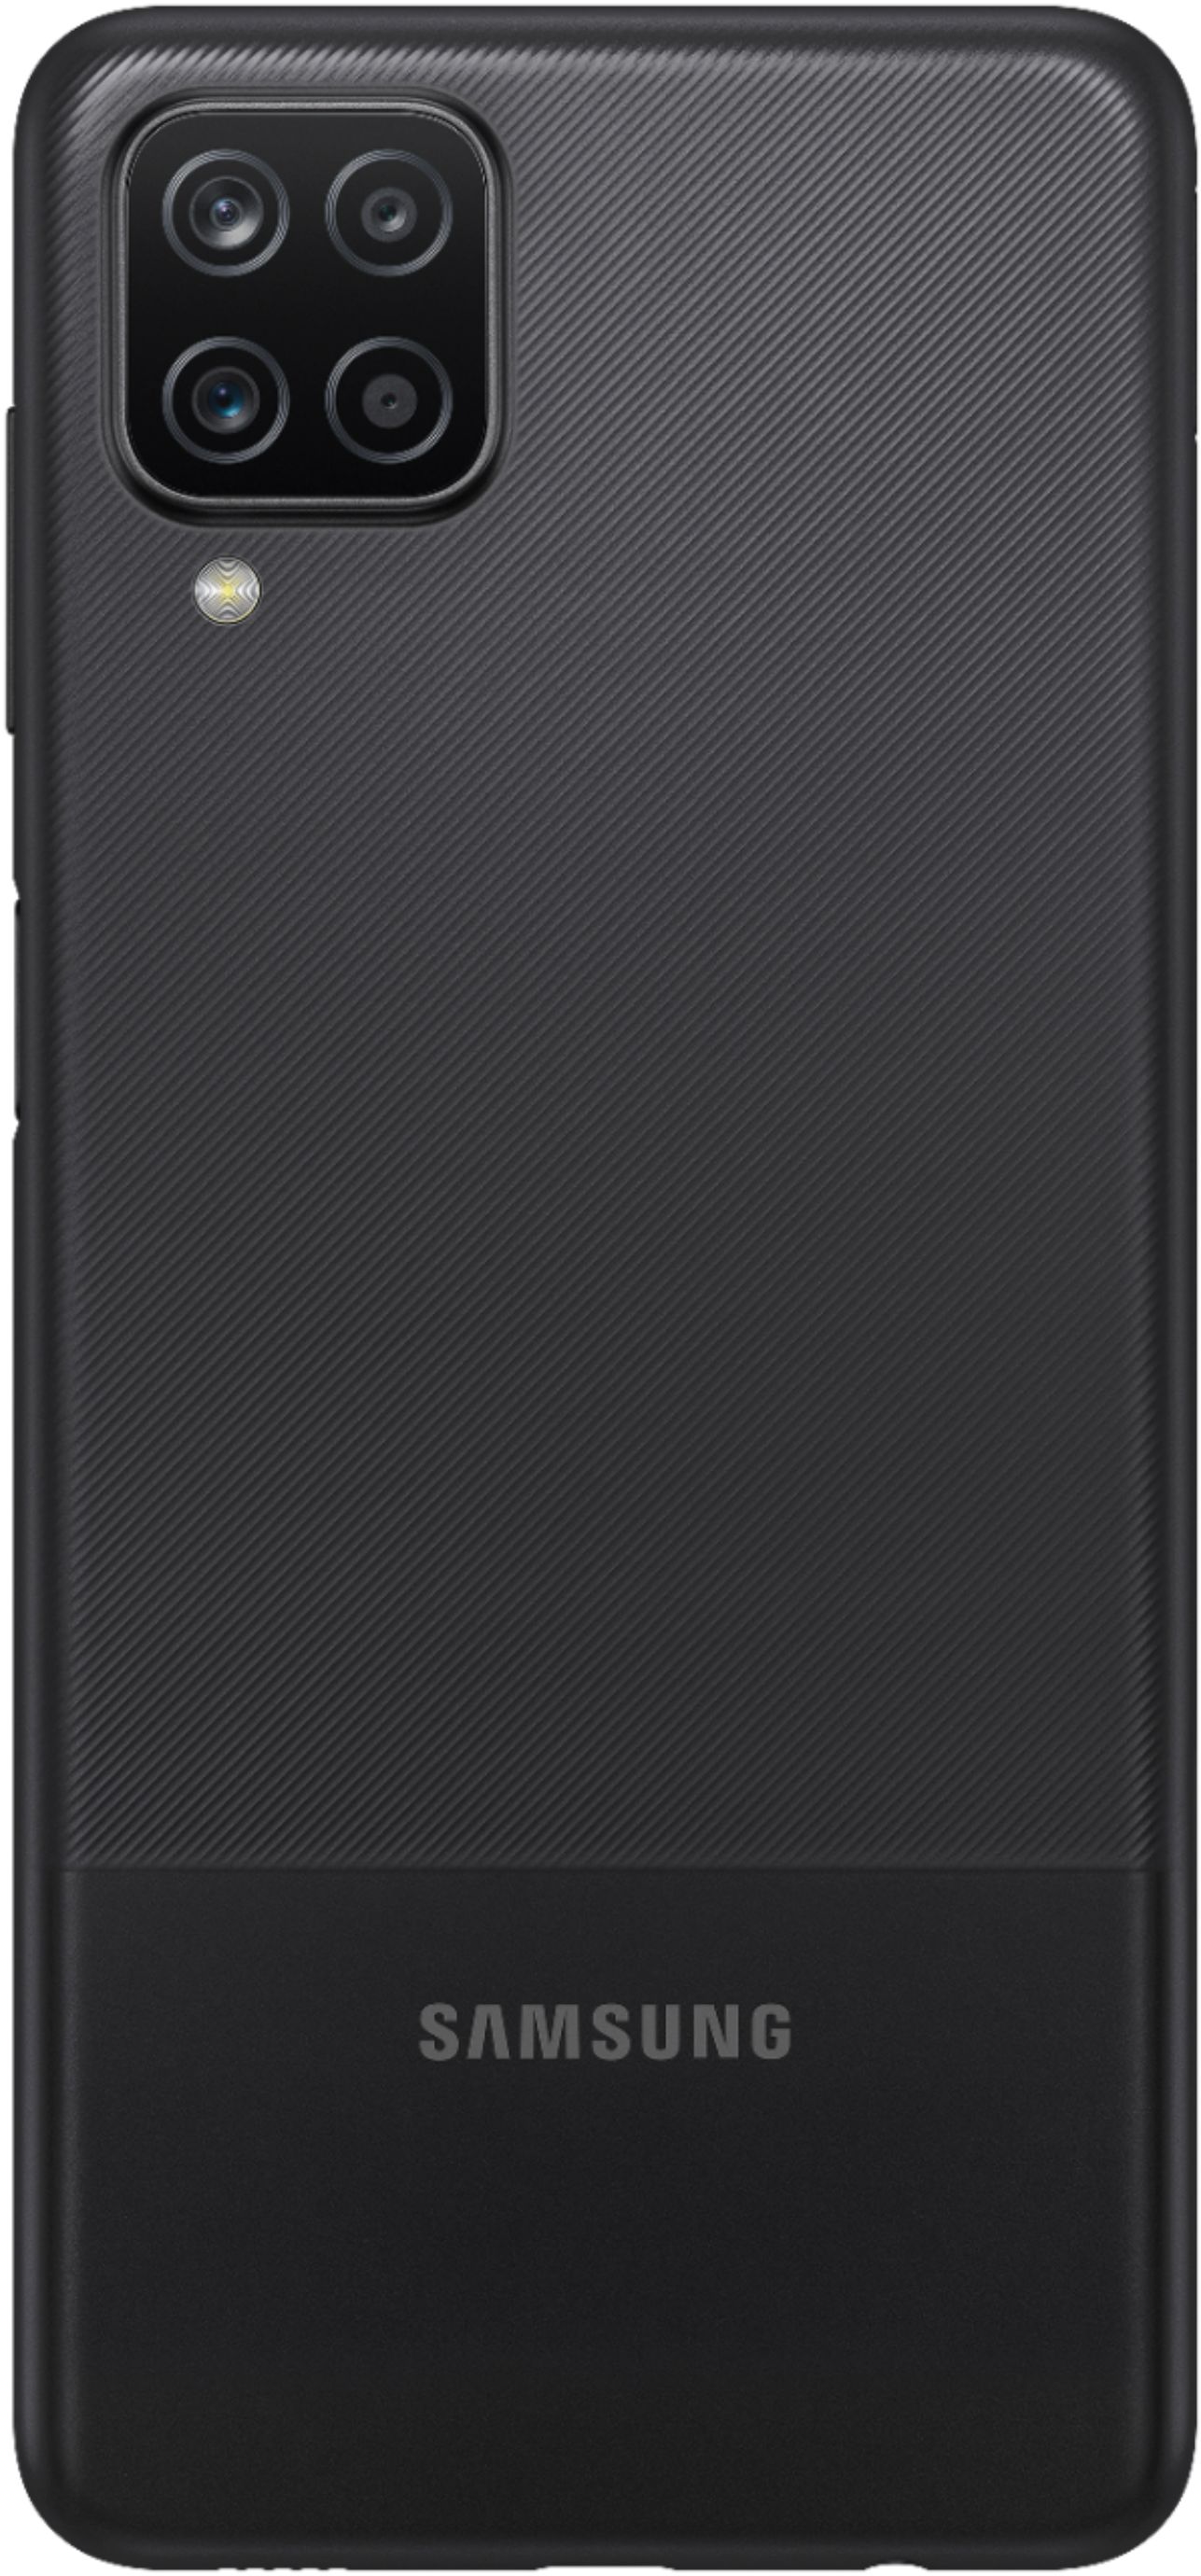 Back View: SaharaCase - Military Series Case for Samsung Galaxy Note 10 - Black